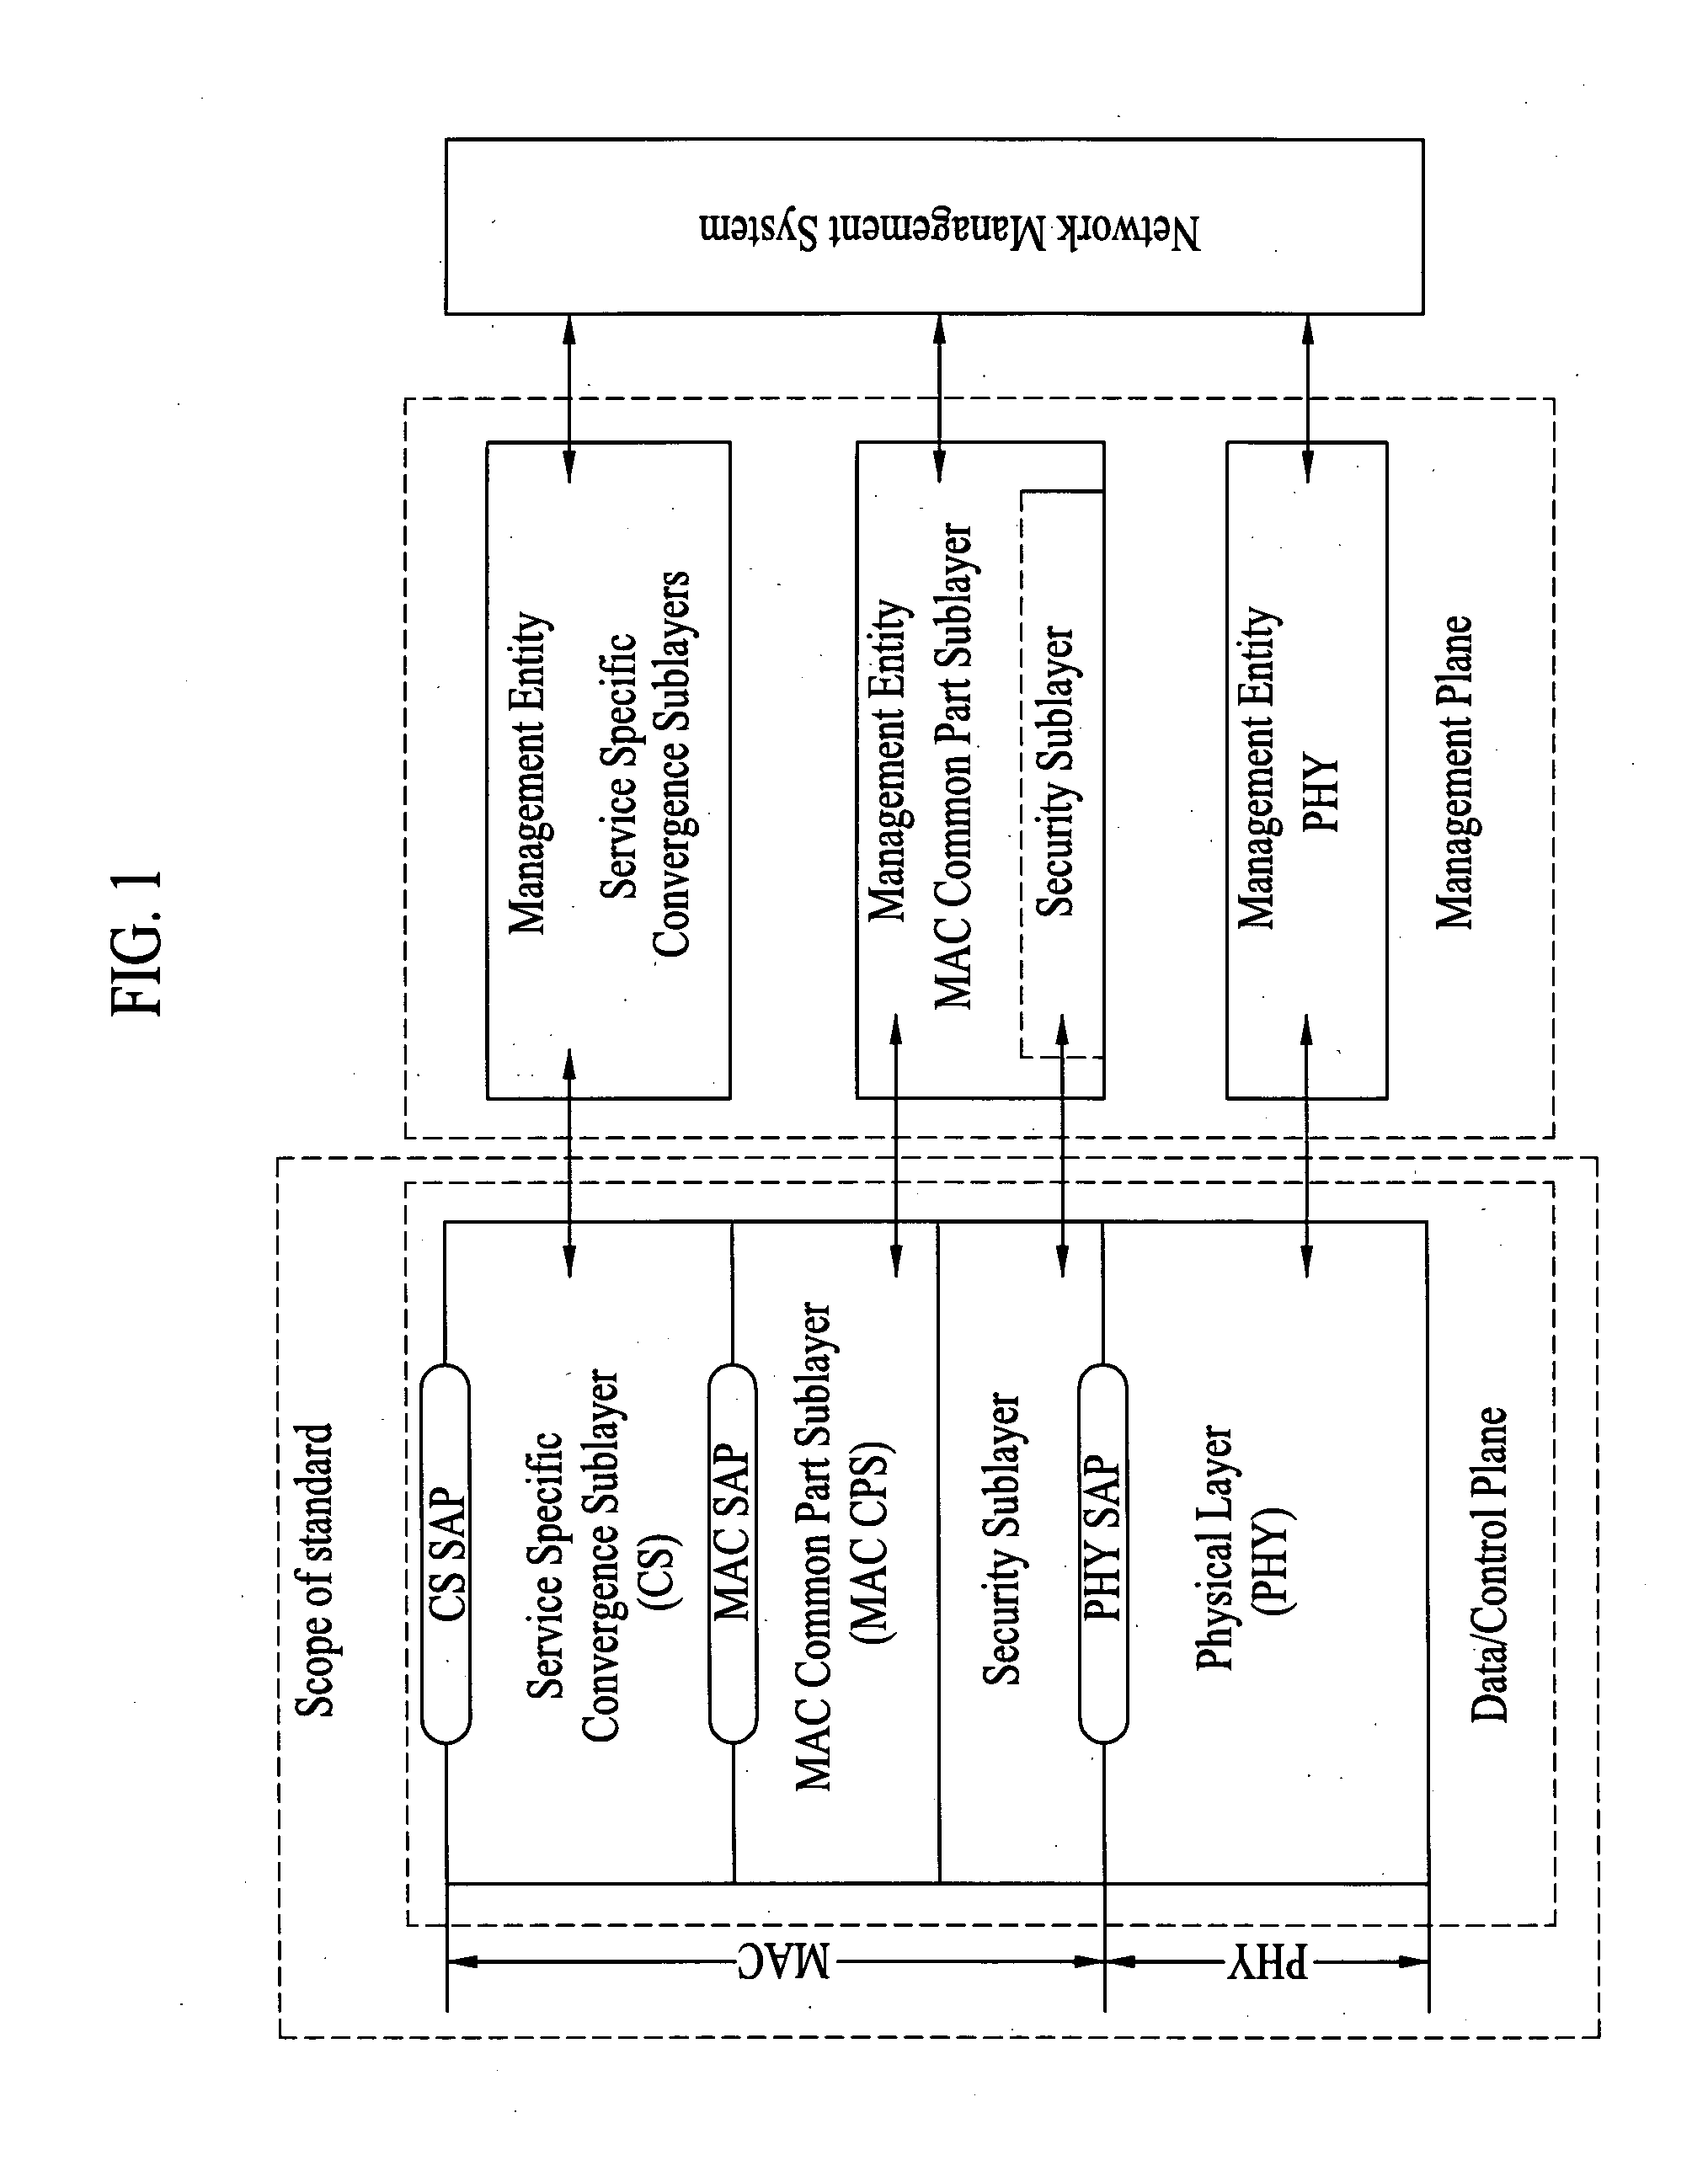 Method of performing procedures for initial network entry and handover in a broadband wireless access system